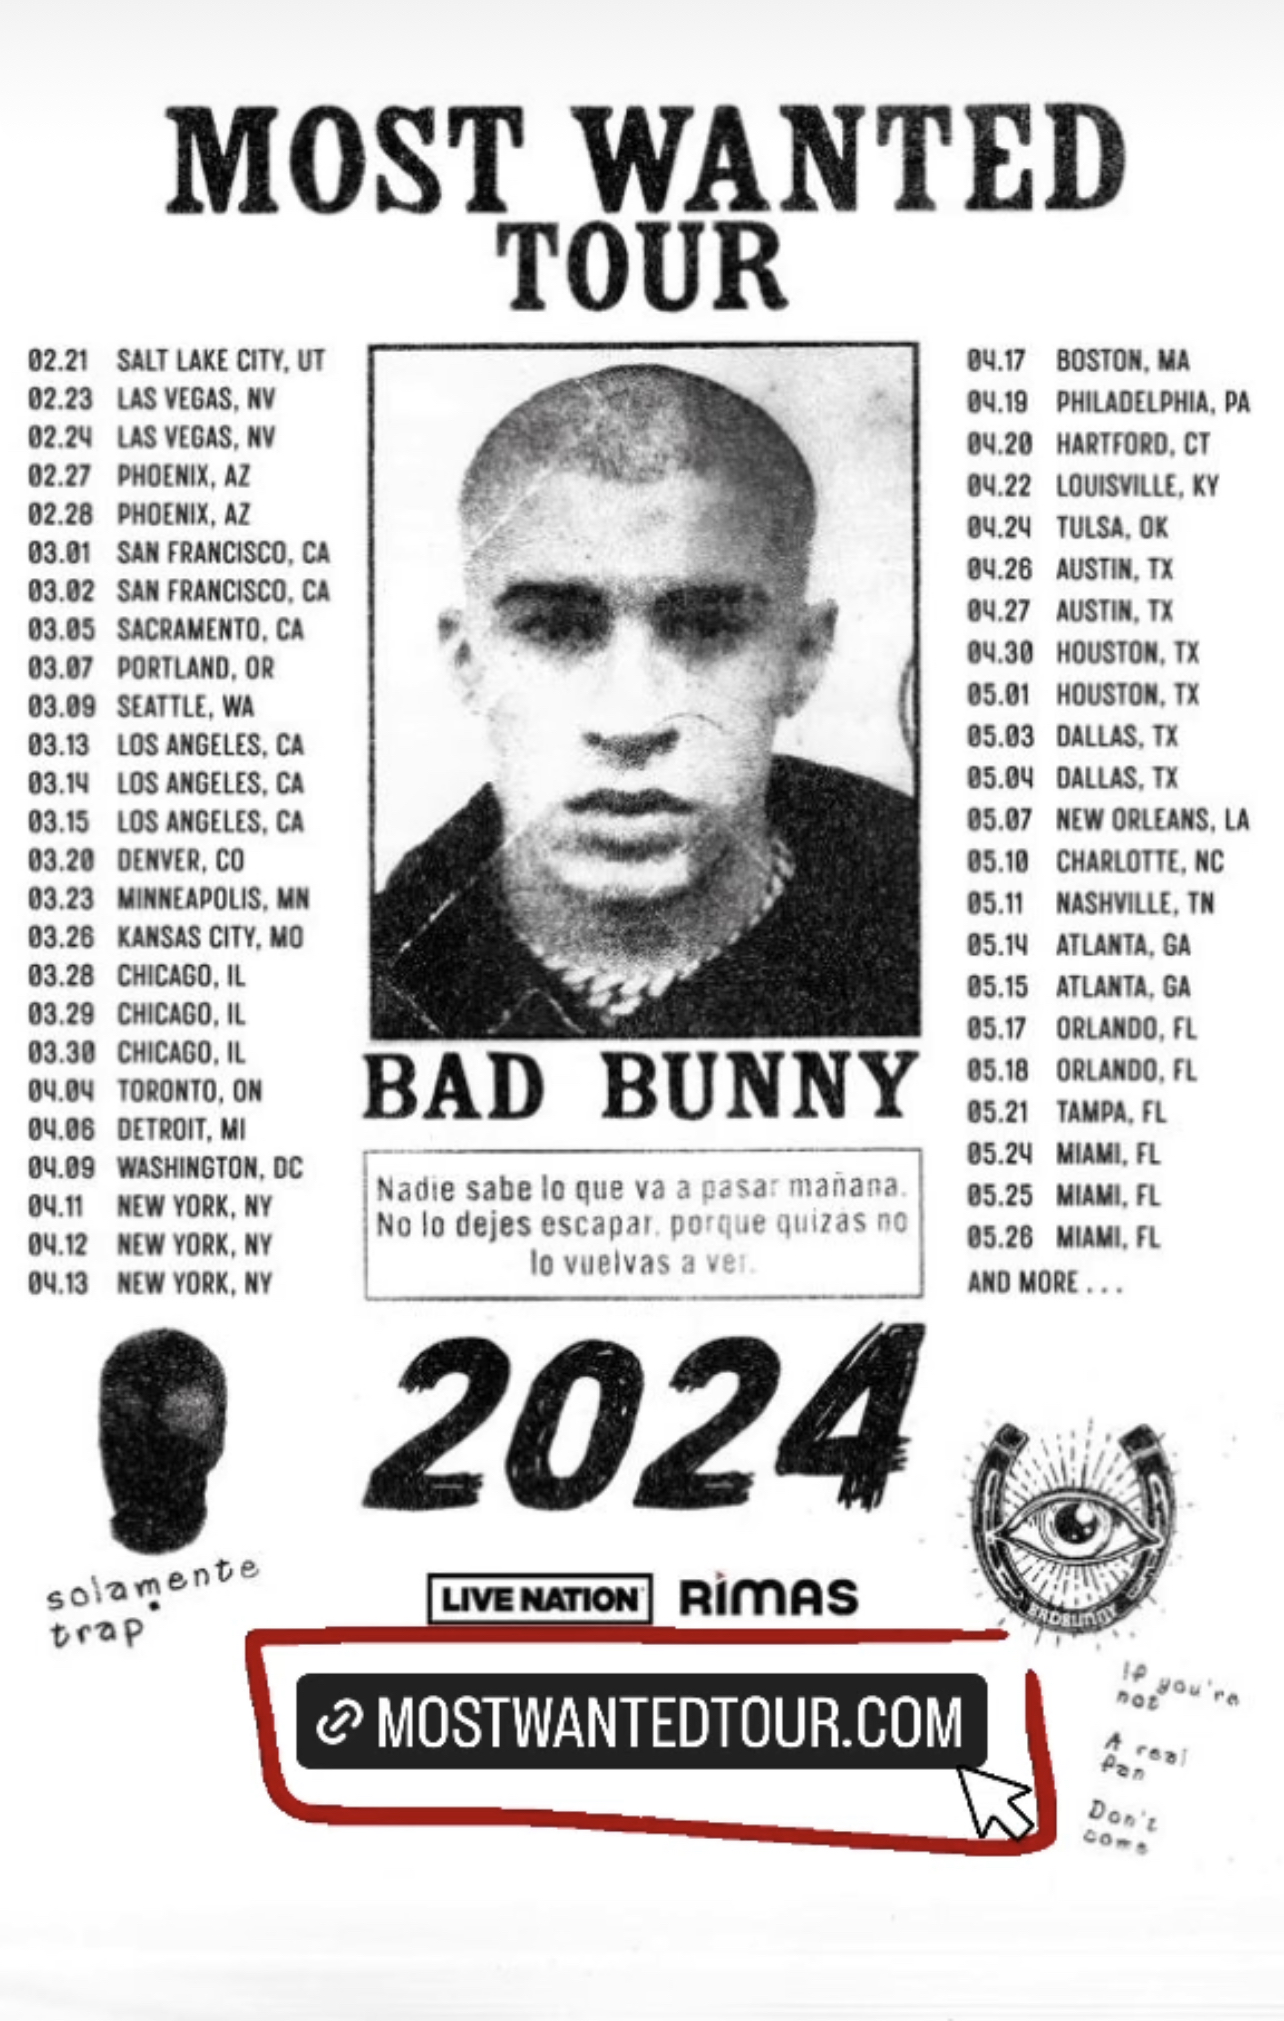 Pa' Que Vayan los Que Son”: Bad Bunny's Bold Call to Fans as He Announces 'Most Wanted Tour’